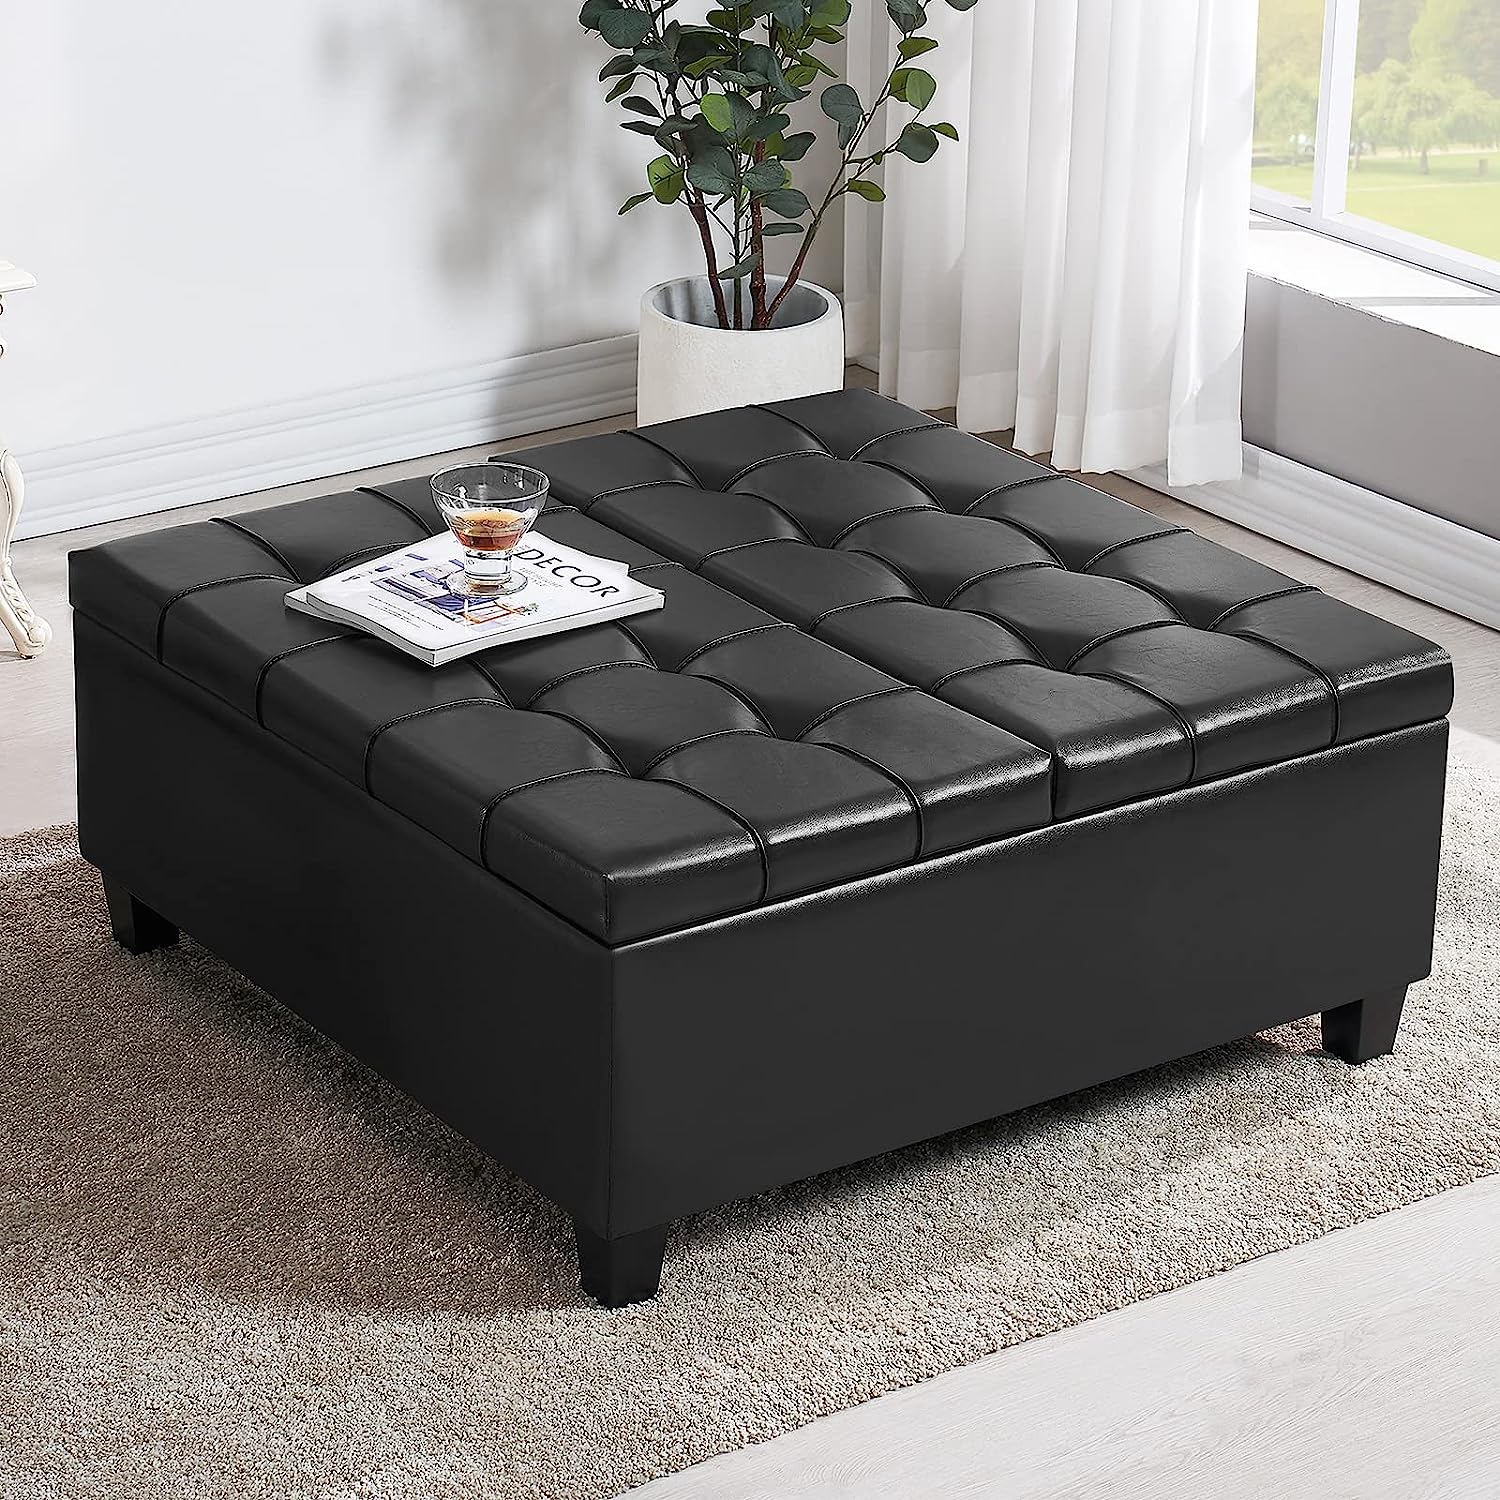 lift top faux leather storage ottoman cocktail table for living room biscuit tufted top glossy black leather upholstery square shape multipurpose work from home furniture